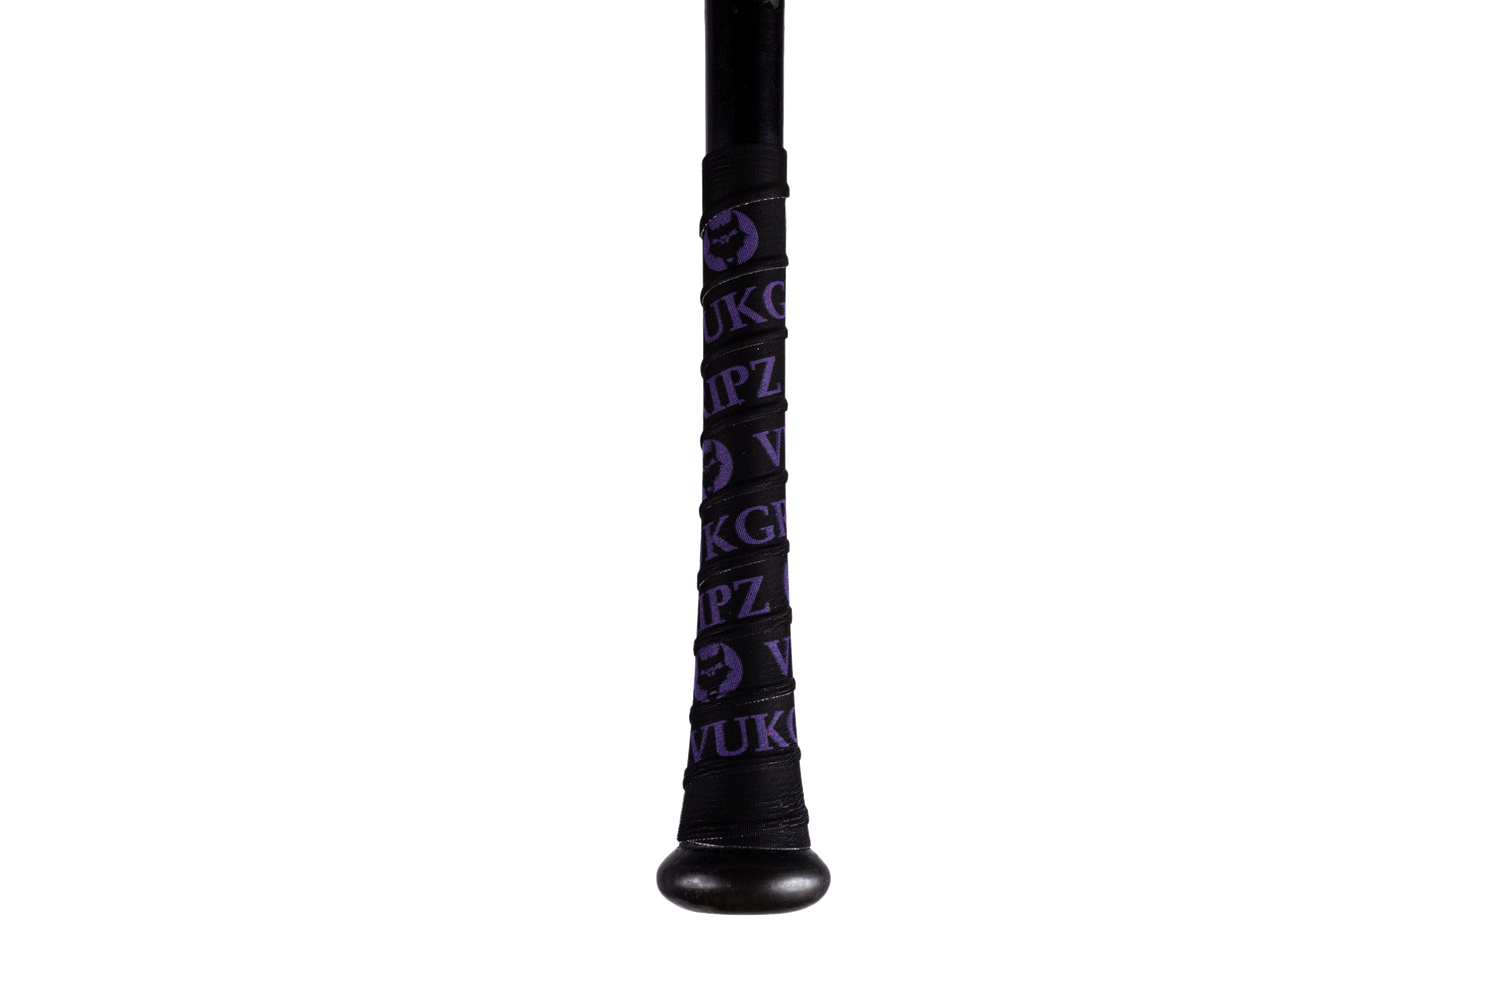 VukGripz Black Bat Grip Tape with Purple logos is American Made, Thin, and Durable bat tape